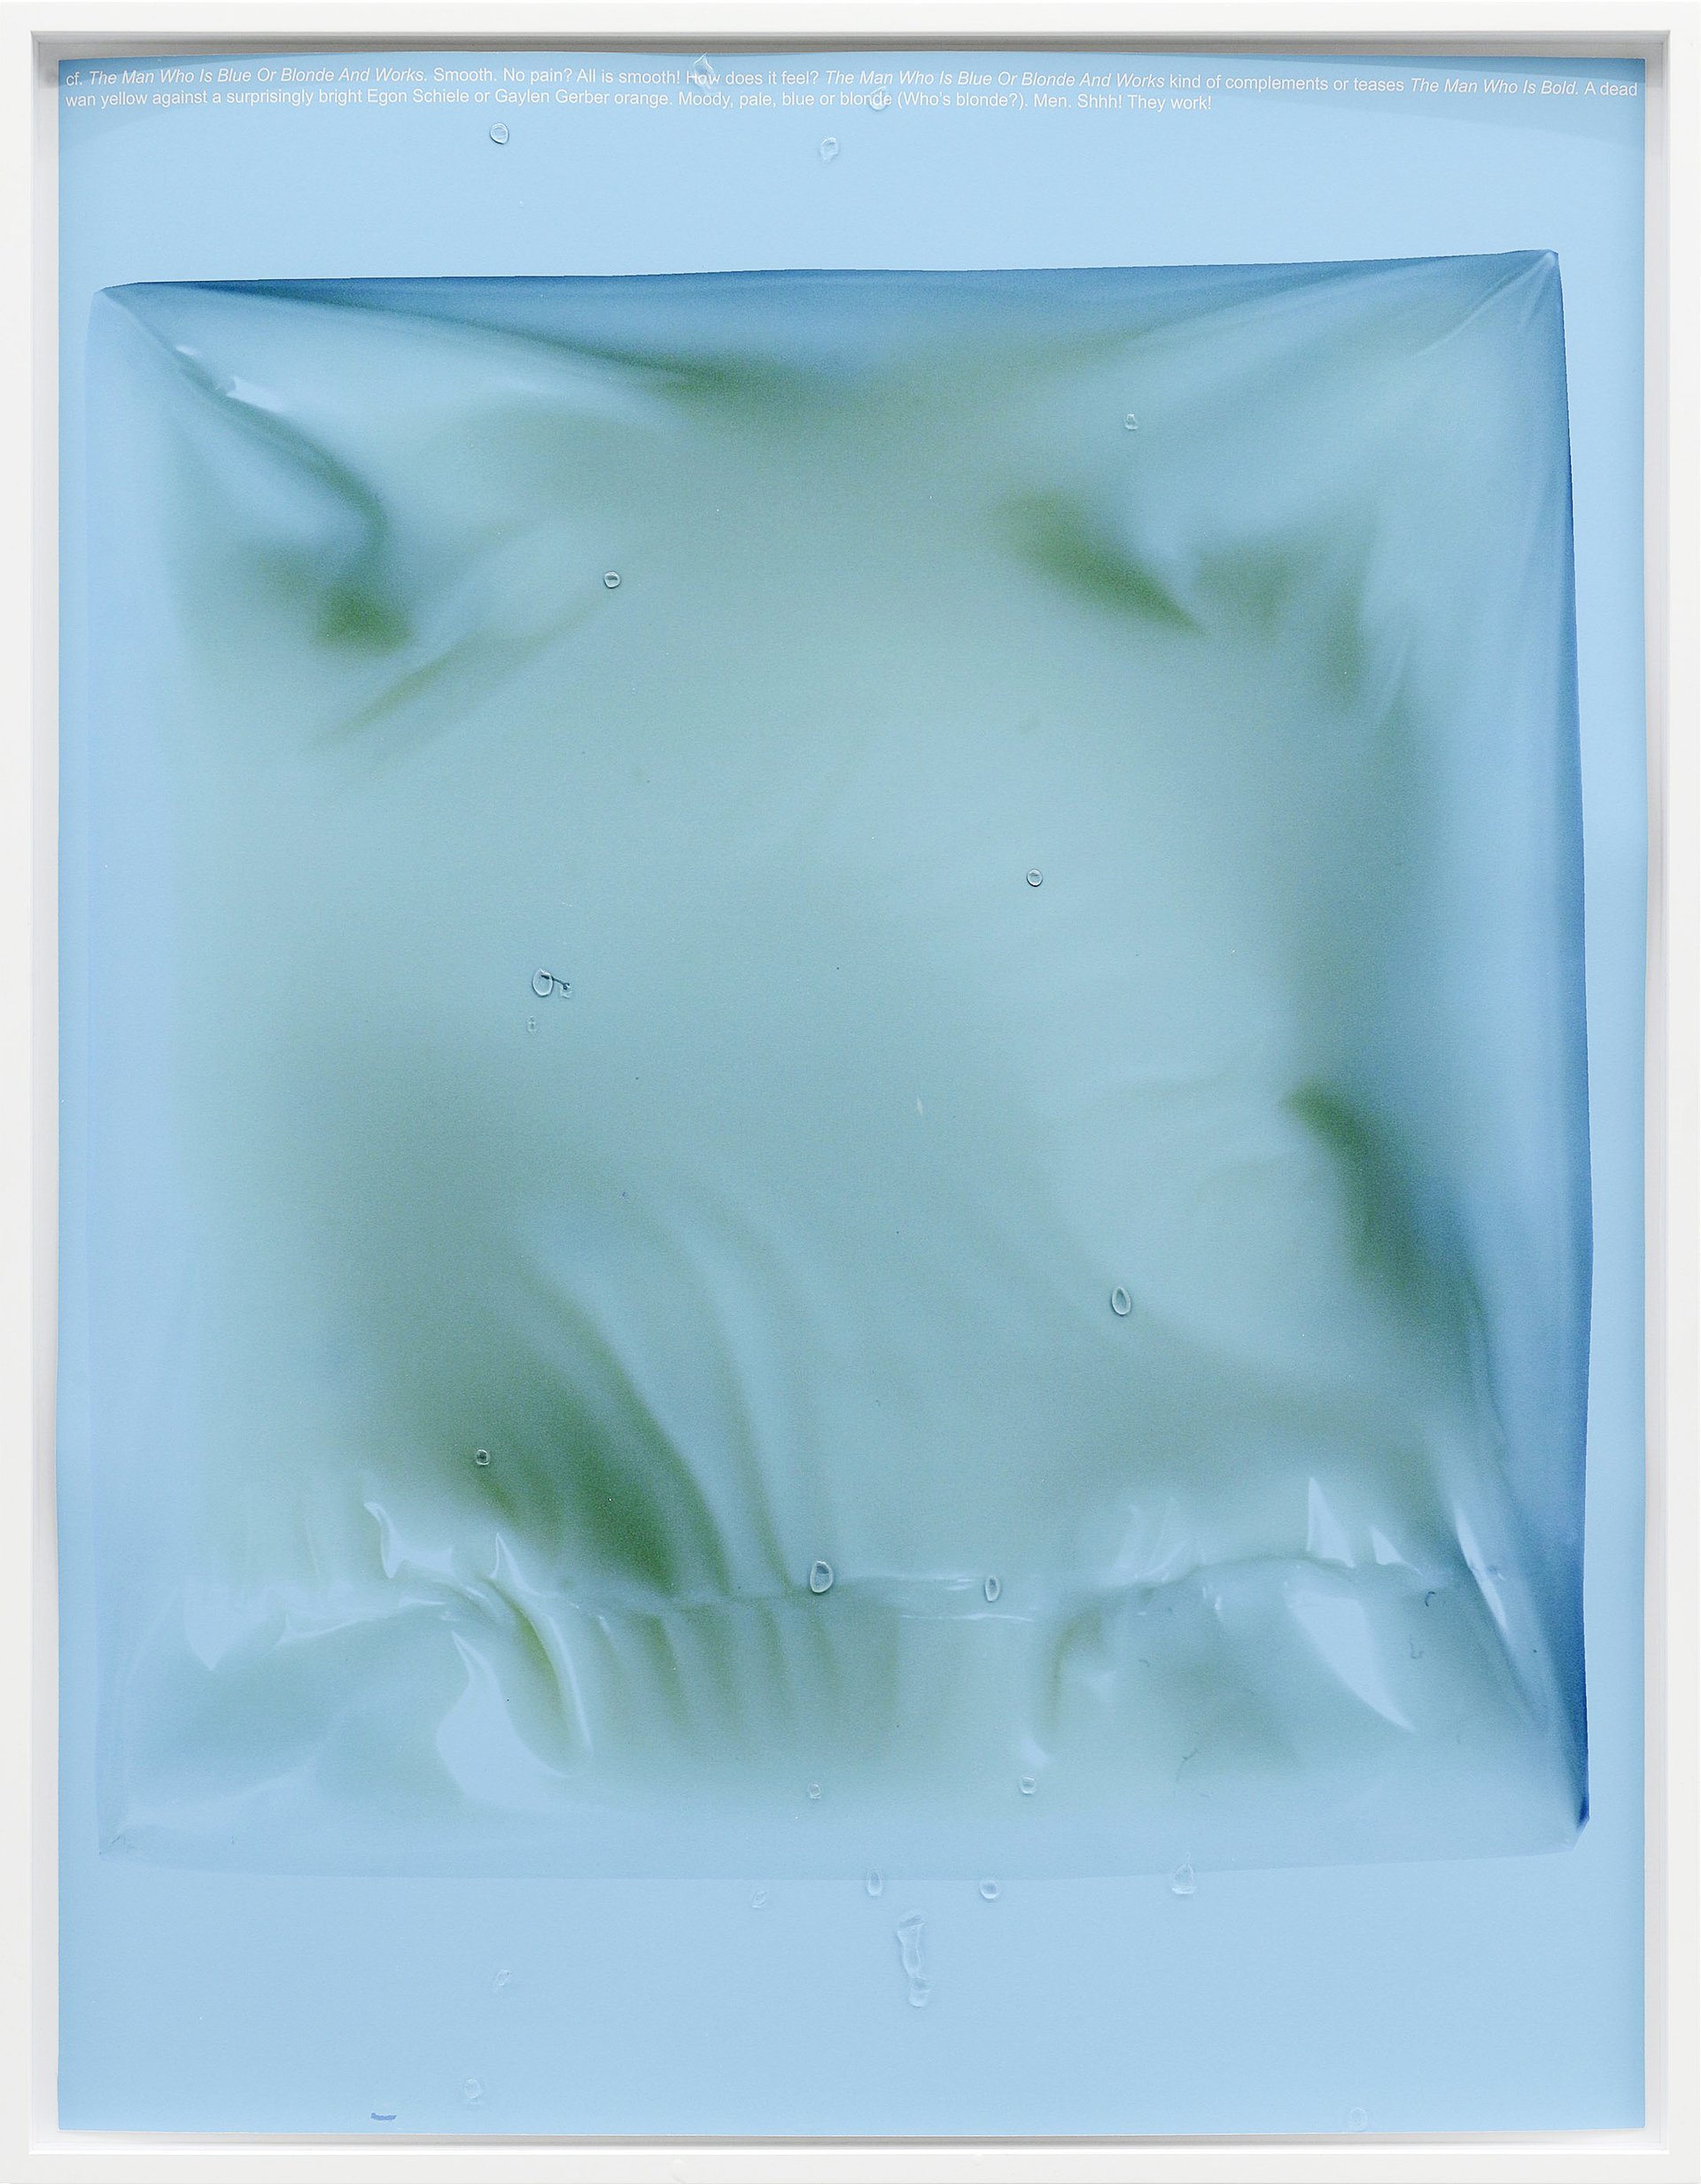 Lisa HolzerThe Man Who Is Blue Or Blonde And Works, 2016Pigment print on cotton paper, Crystal Clear 202/1 polyurethane on glass92 x 72 cm